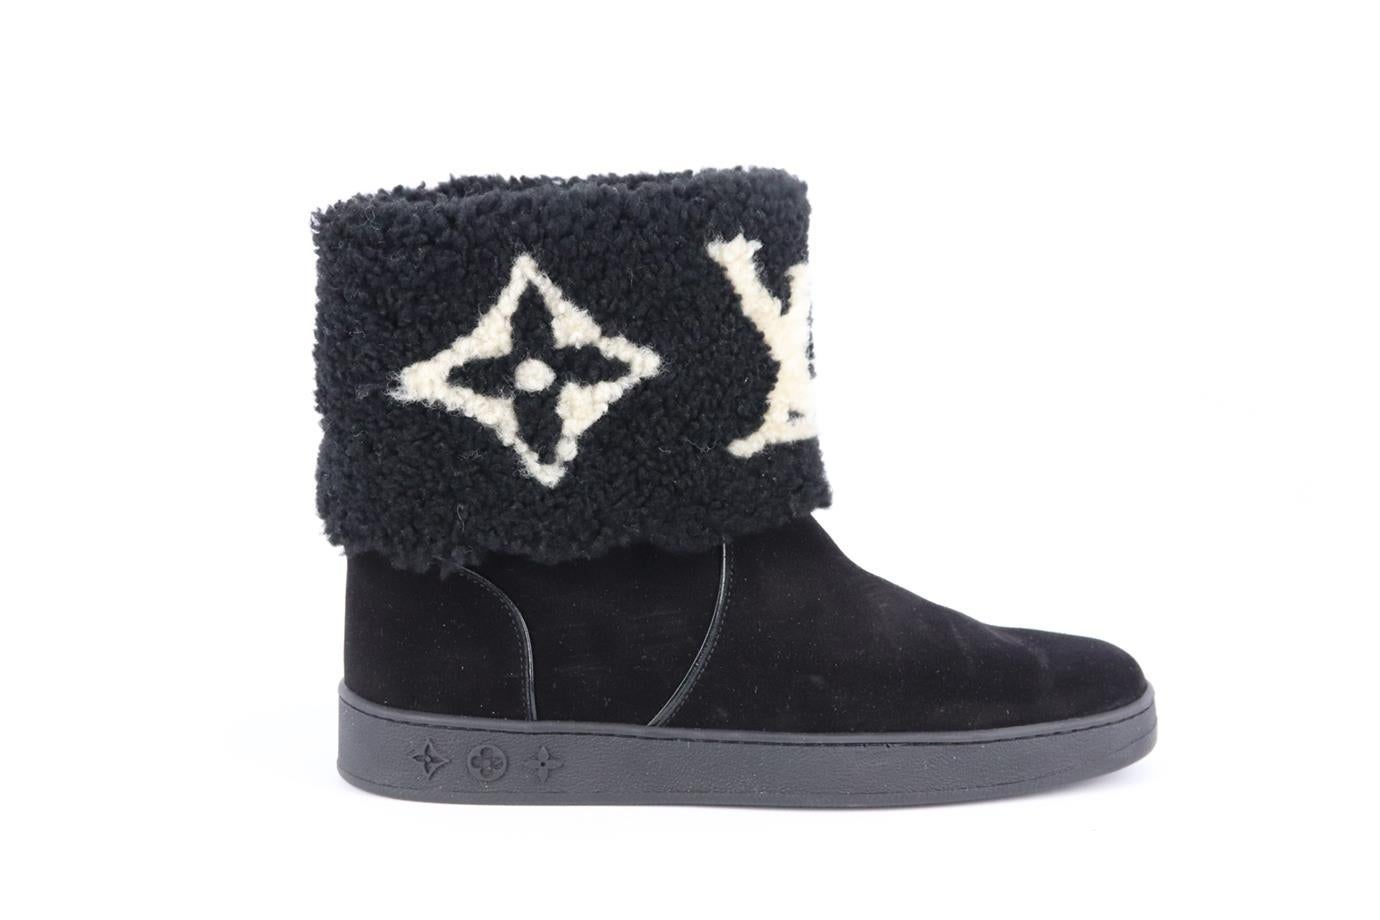 Louis Vuitton Snowdrop monogrammed shearling and suede ankle boots. Black and white. Pull on. Does not come with box or dustbag. Size: EU 38 (UK 5, US 8). Outersole: 10.6 in. Shaft: 6.4 in. Heel: 1.2 in. Very good condition - Worn once. Light wear